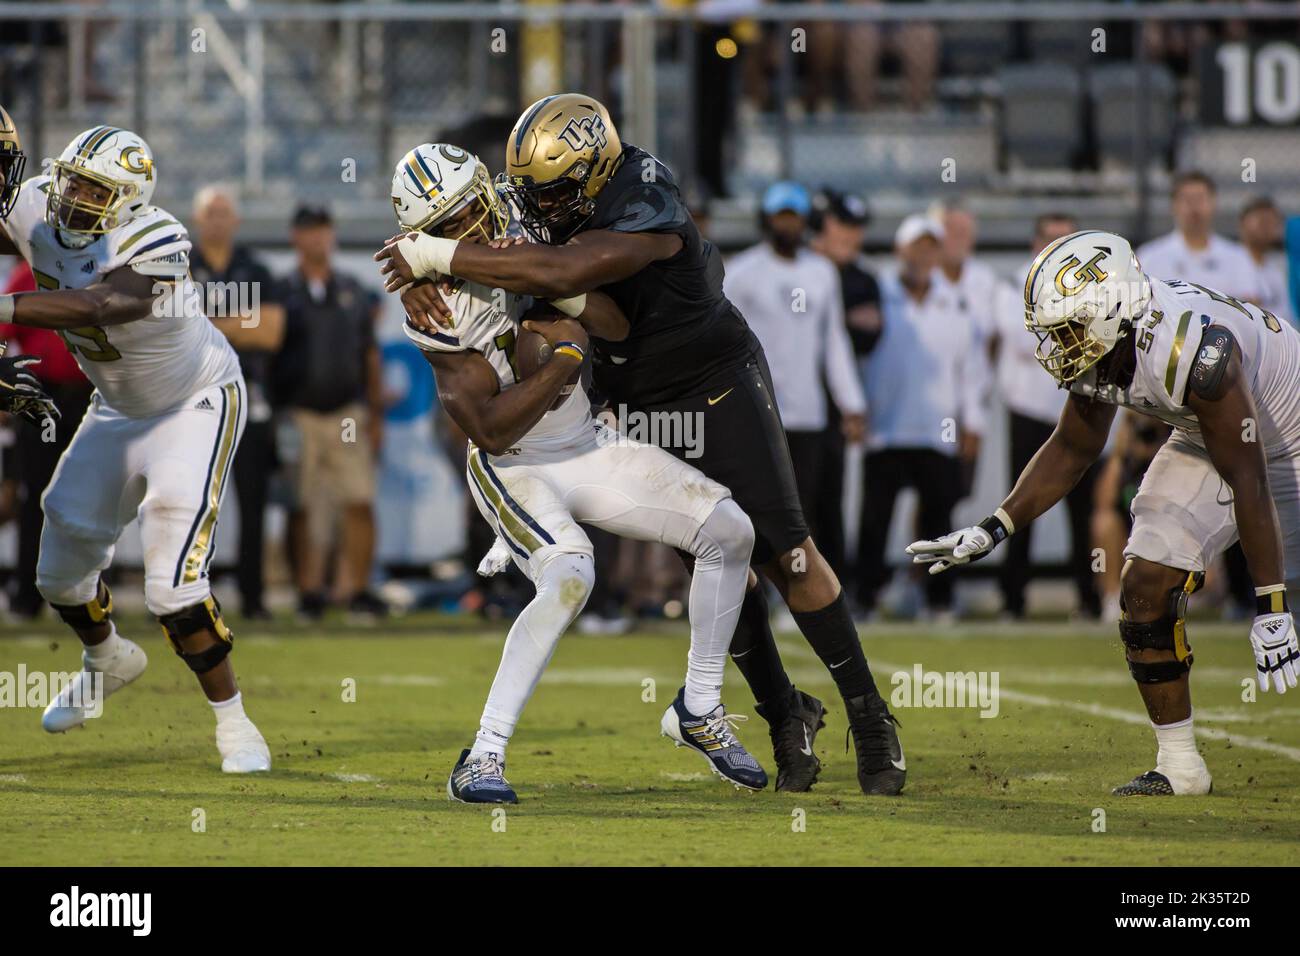 September 24, 2022: during the NCAA football game between the Georgia Tech Yellow Jackets and the University of Central Florida Knights at FBC Mortgage Stadium Orlando, FL. Jonathan Huff/CSM. Stock Photo